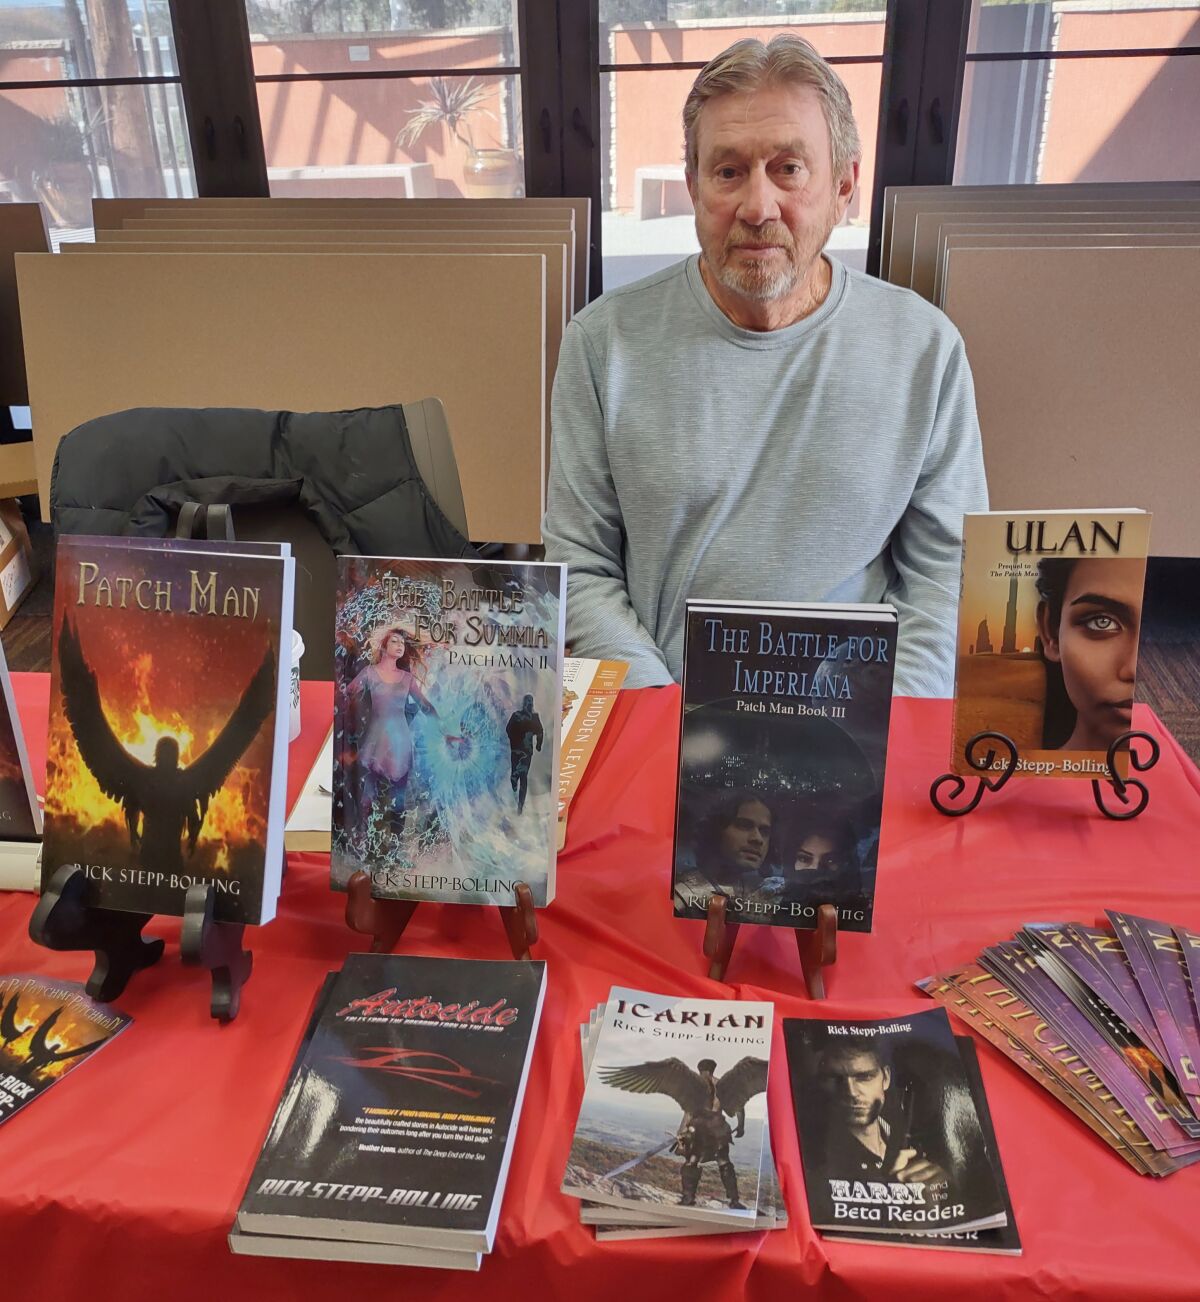 Author Rick Stepp-Bolling read a portion of his book “Patch Man,” the first in a series of science fiction-fantasy books.